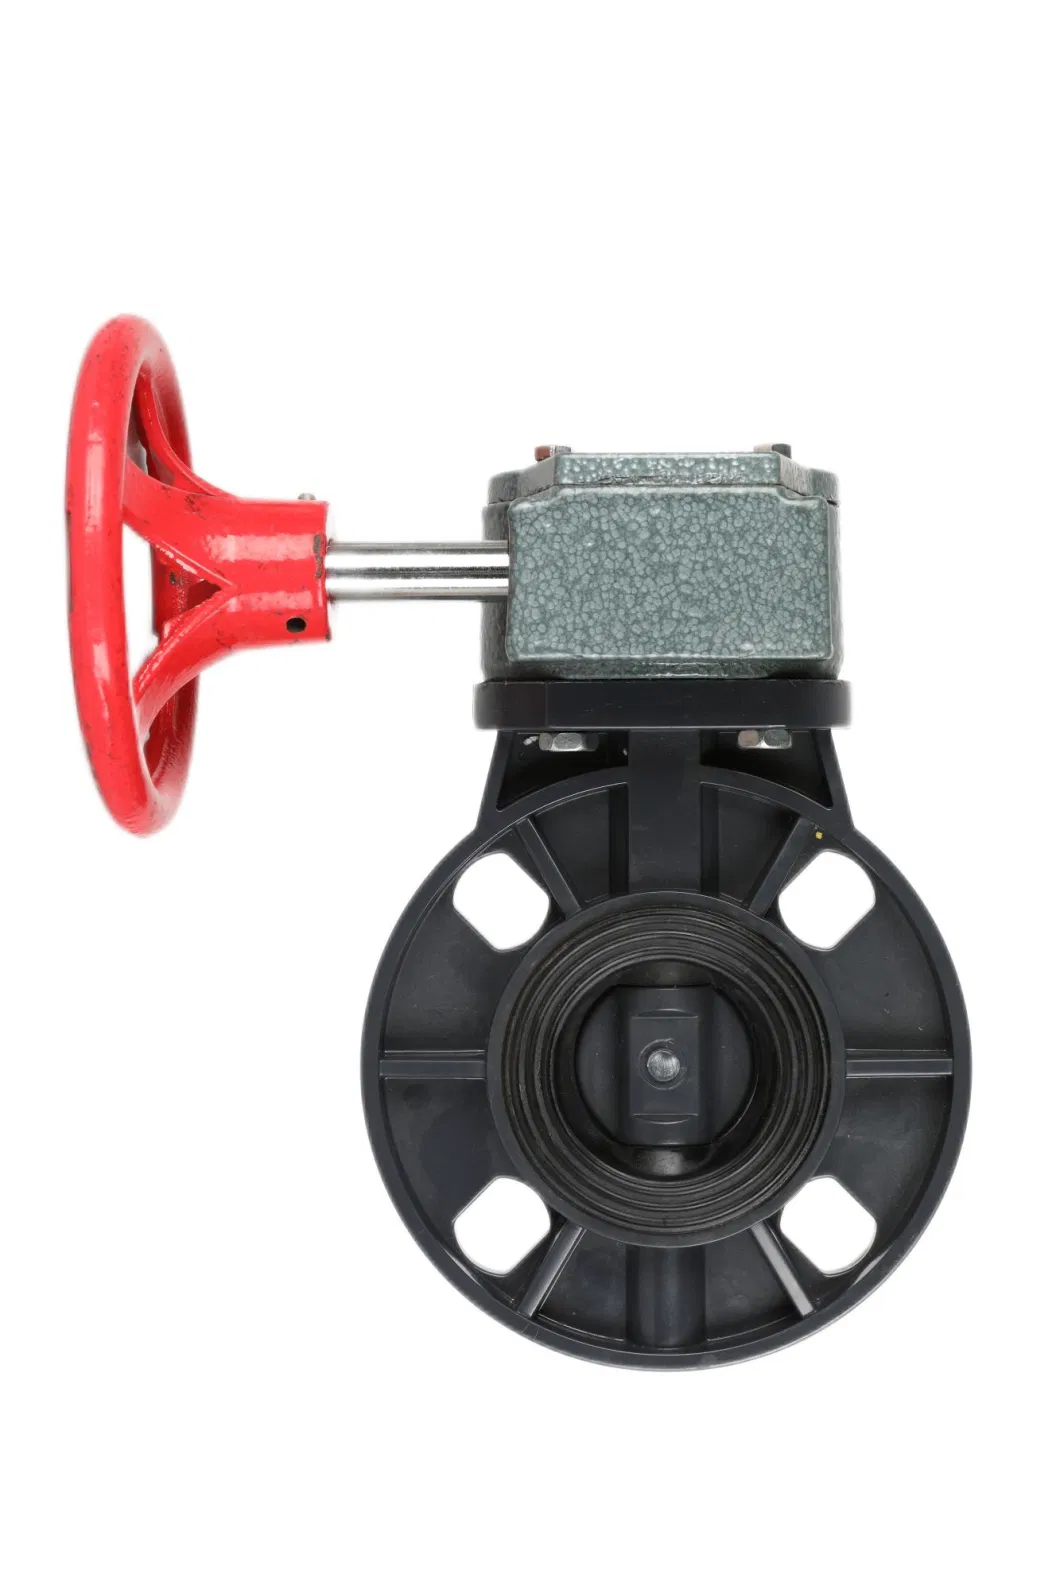 PVC Gear Box Butterfly Valve Cast Iron Ductile Iron Ggg40 Double Eccentric Offset Pn10/16/25 Manual/Actuator Flanged